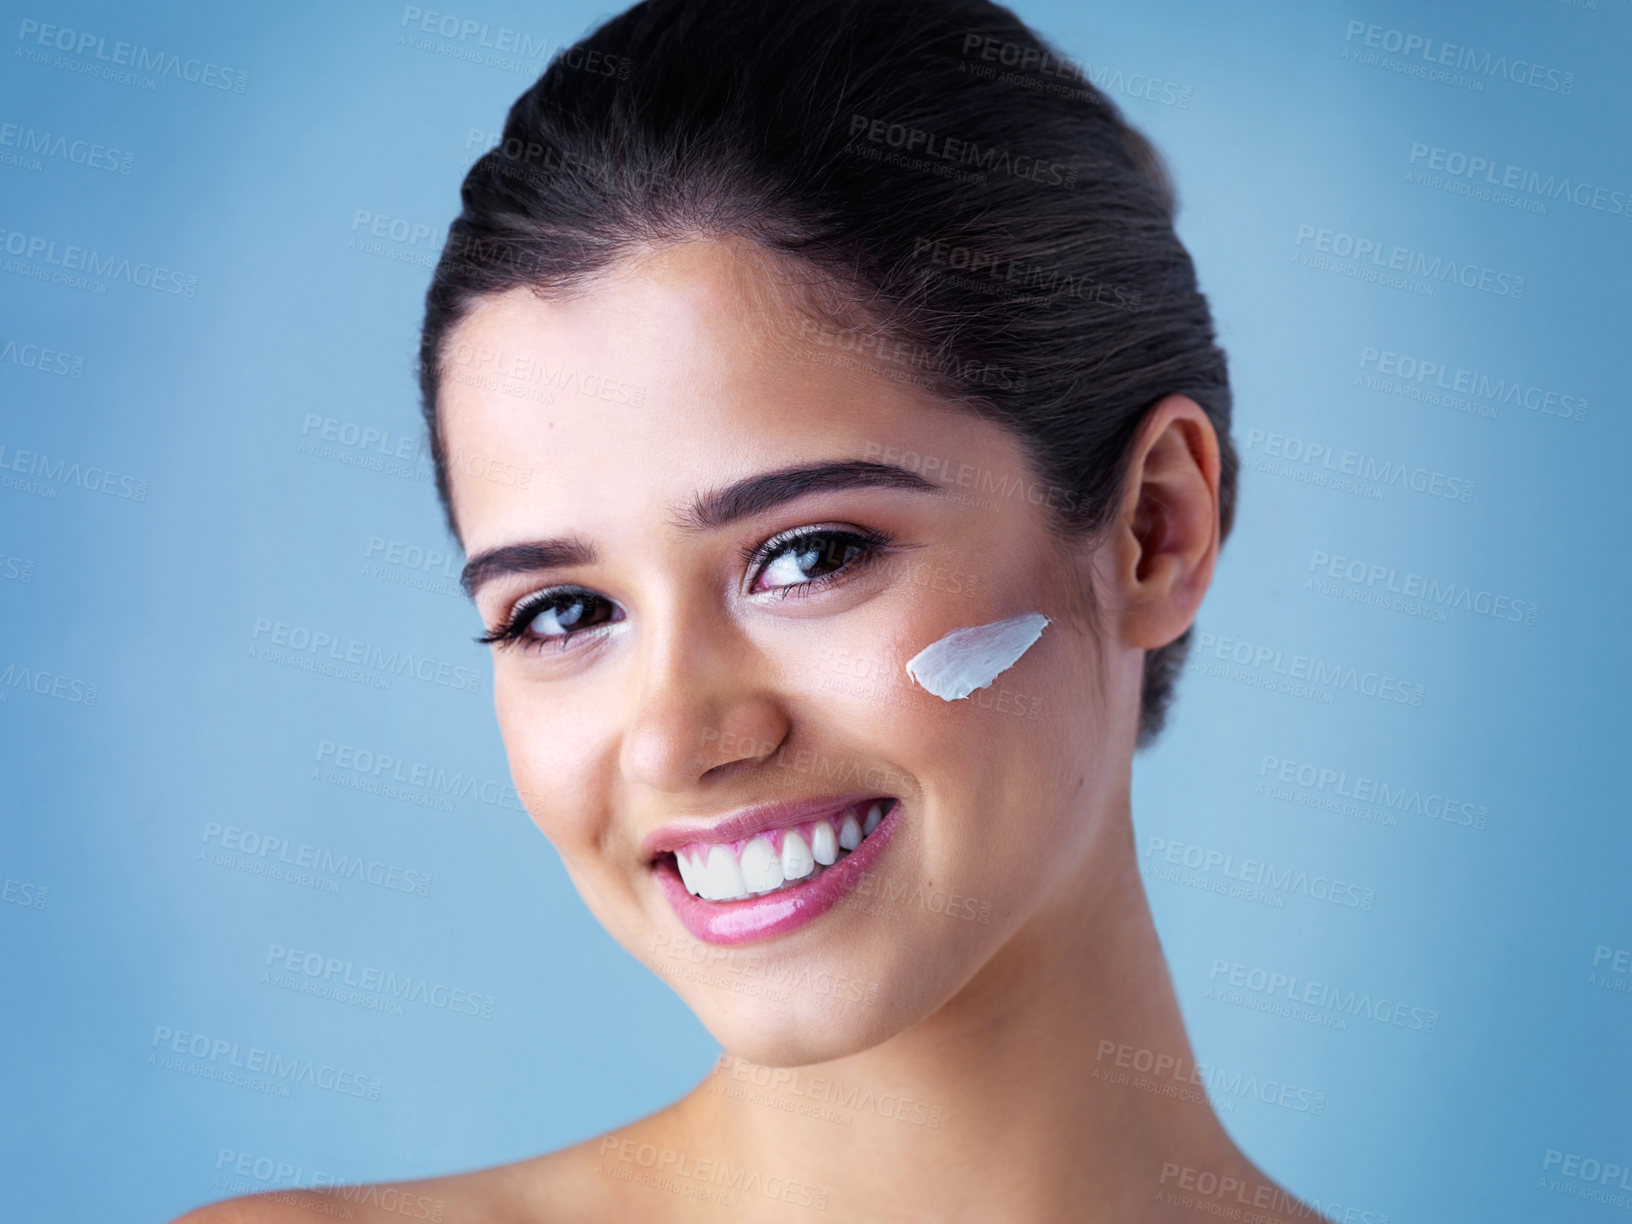 Buy stock photo Studio portrait of a beautiful young woman posing with lotion on her face against a blue background